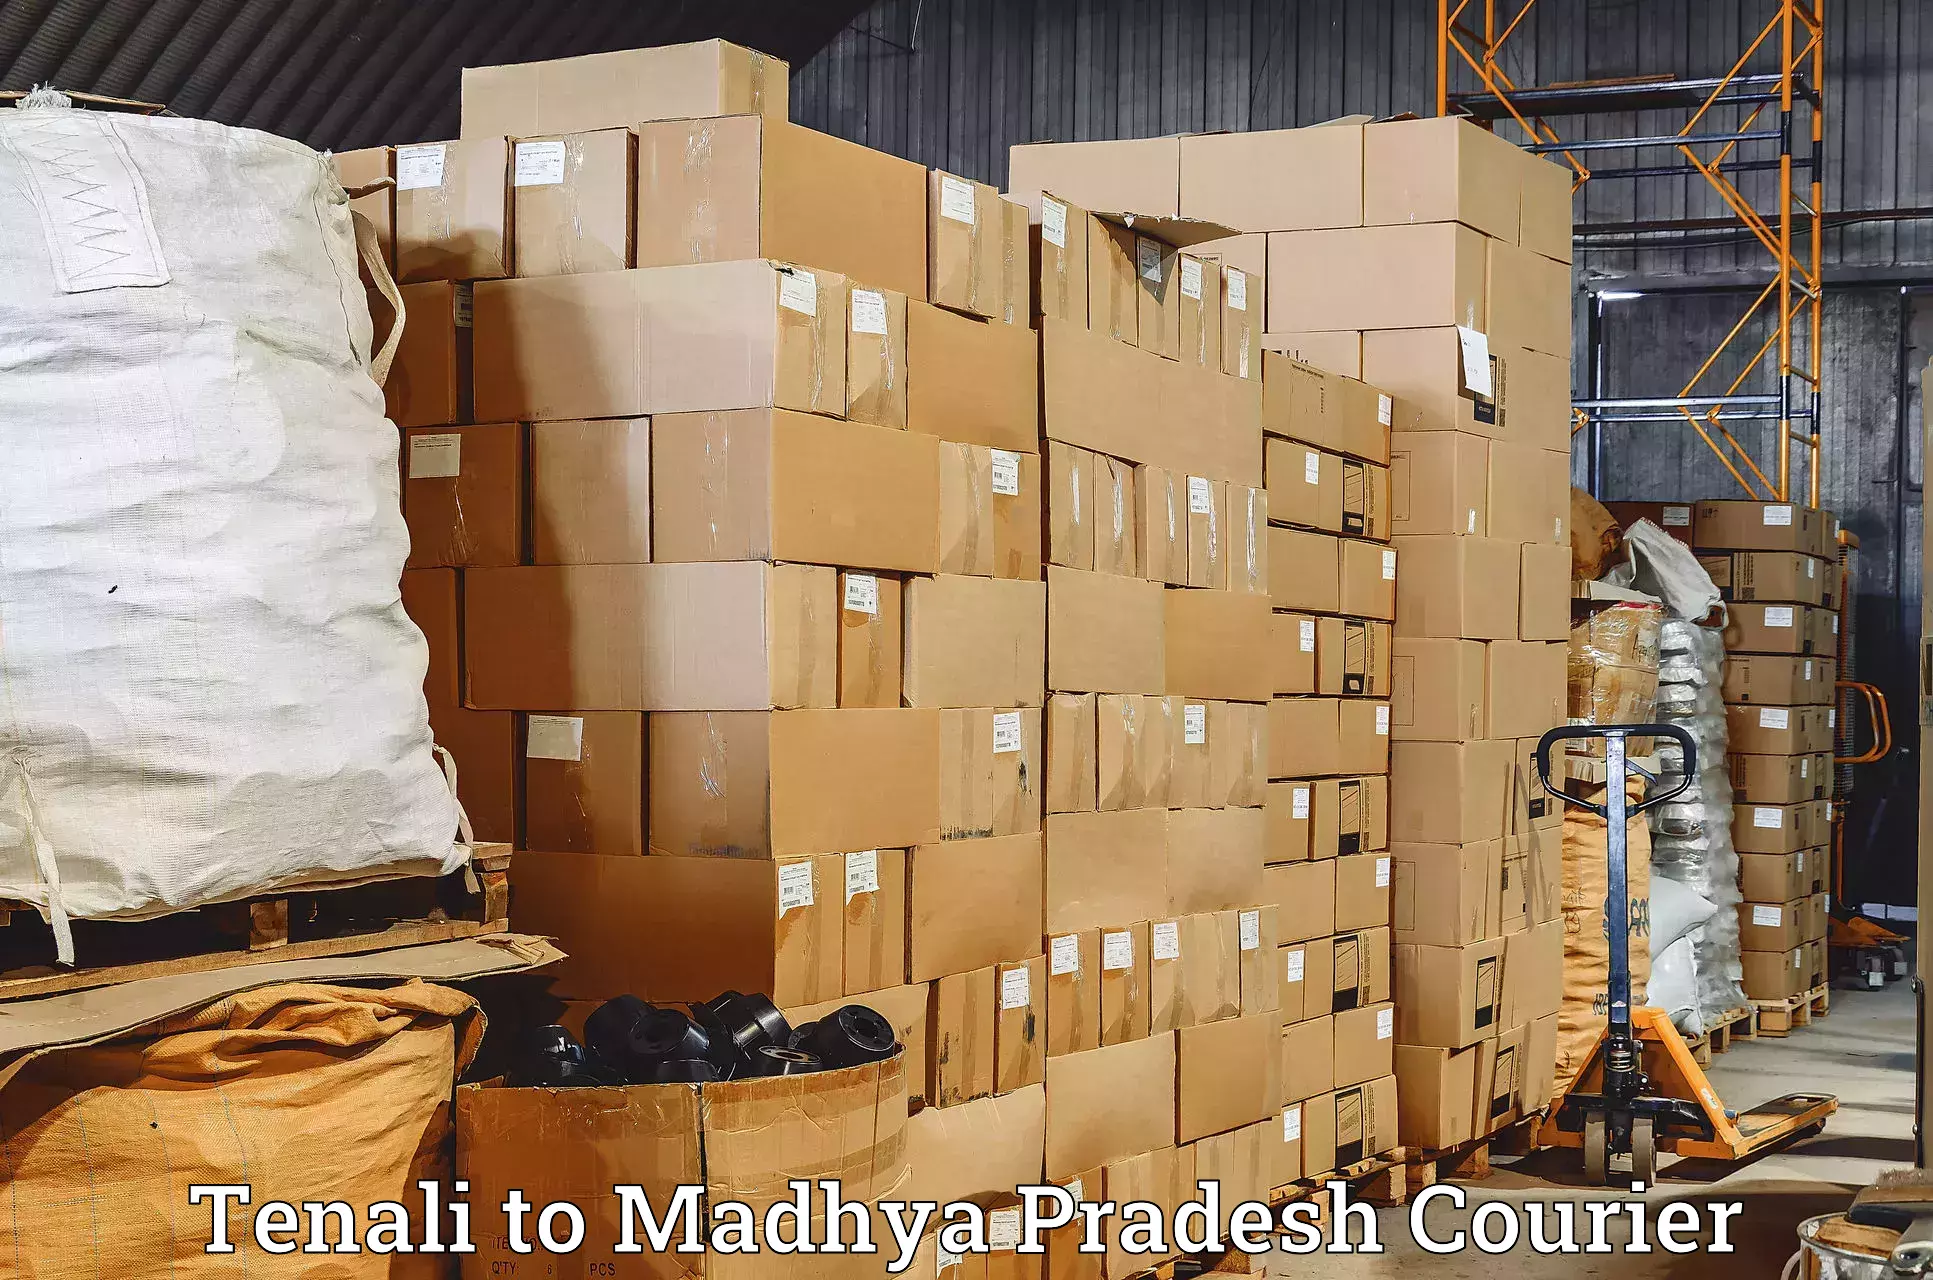 Professional courier handling Tenali to Ratlam